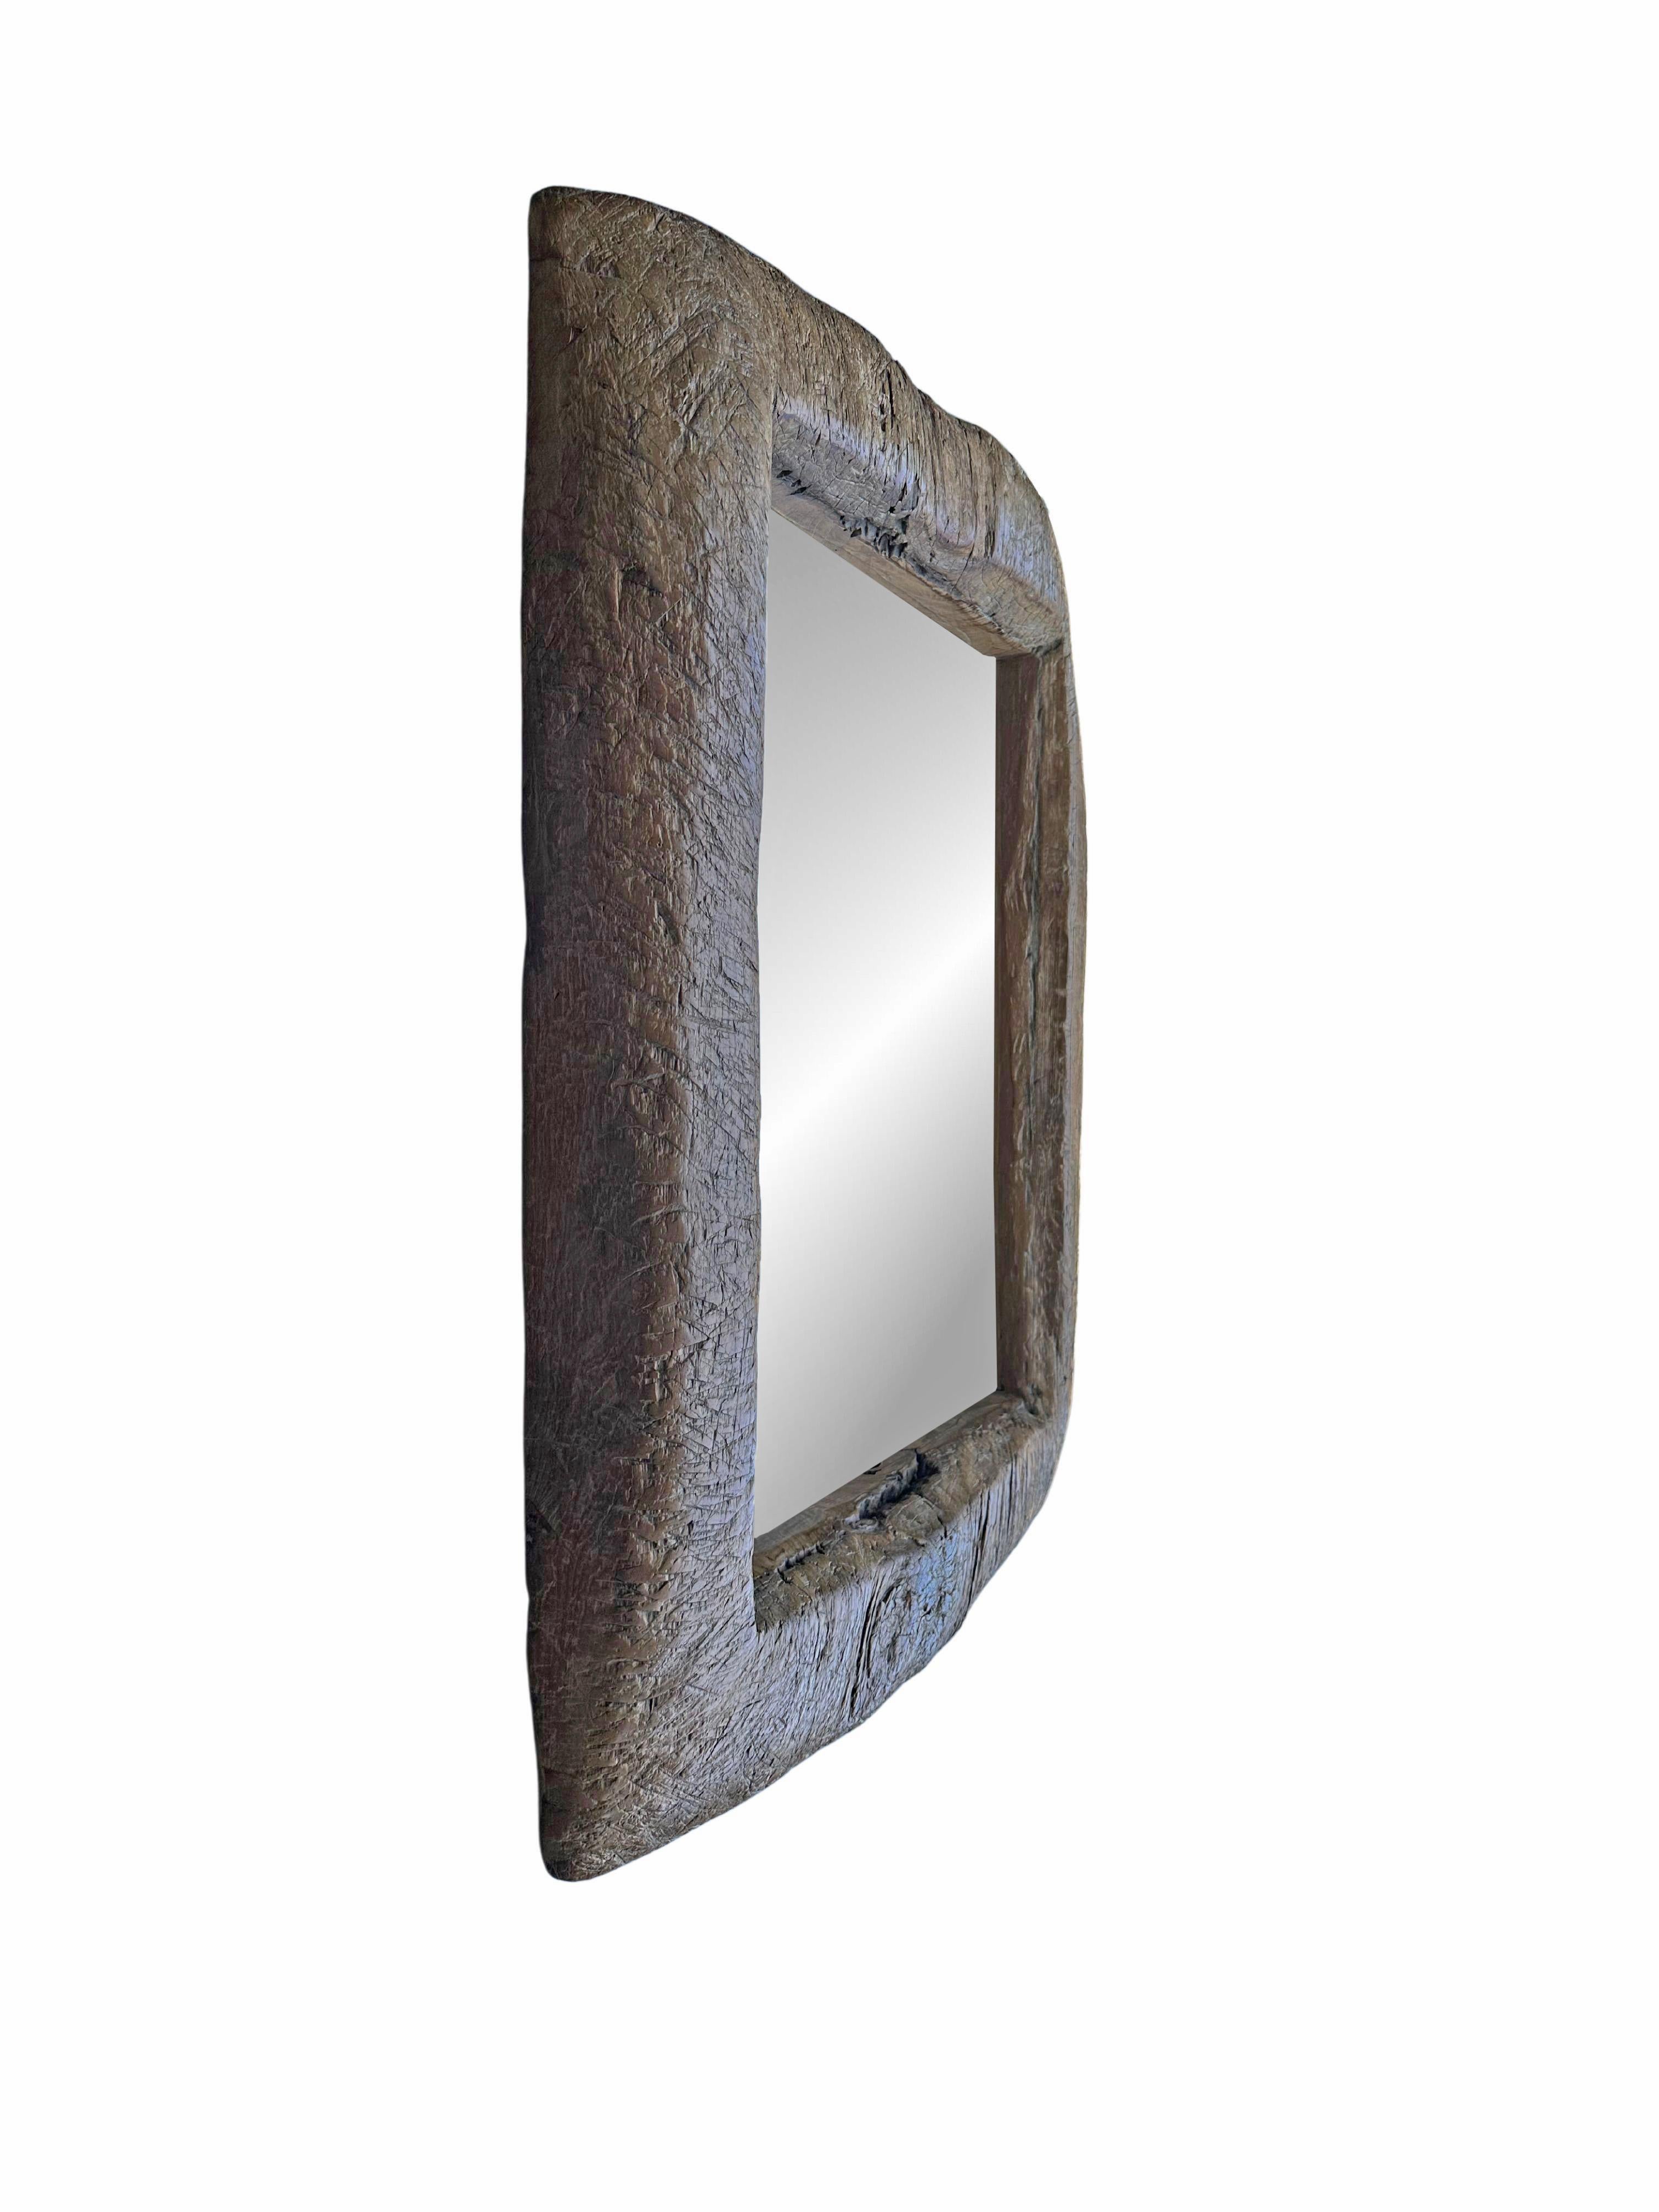 Indonesian Rustic Teak Wood Mirror With Wonderful Age Related Patina & Markings For Sale